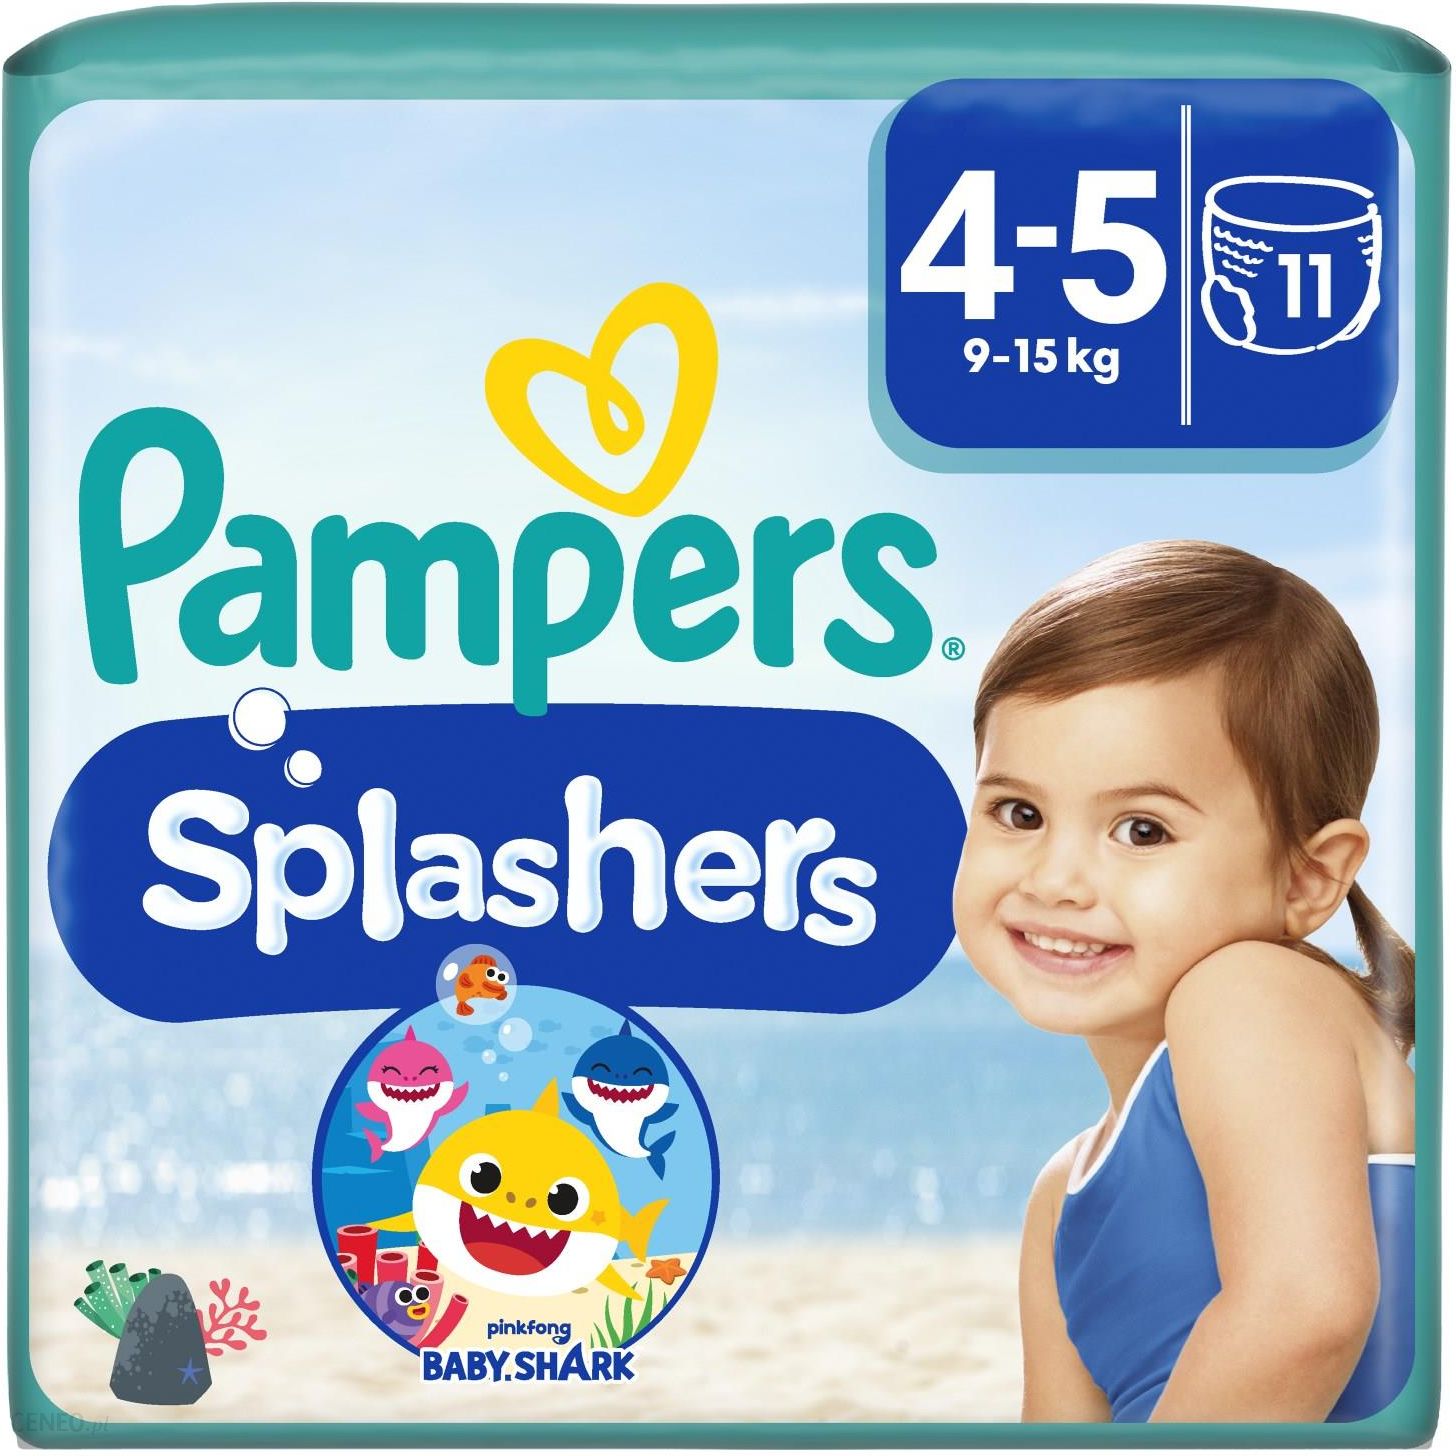 pampers o